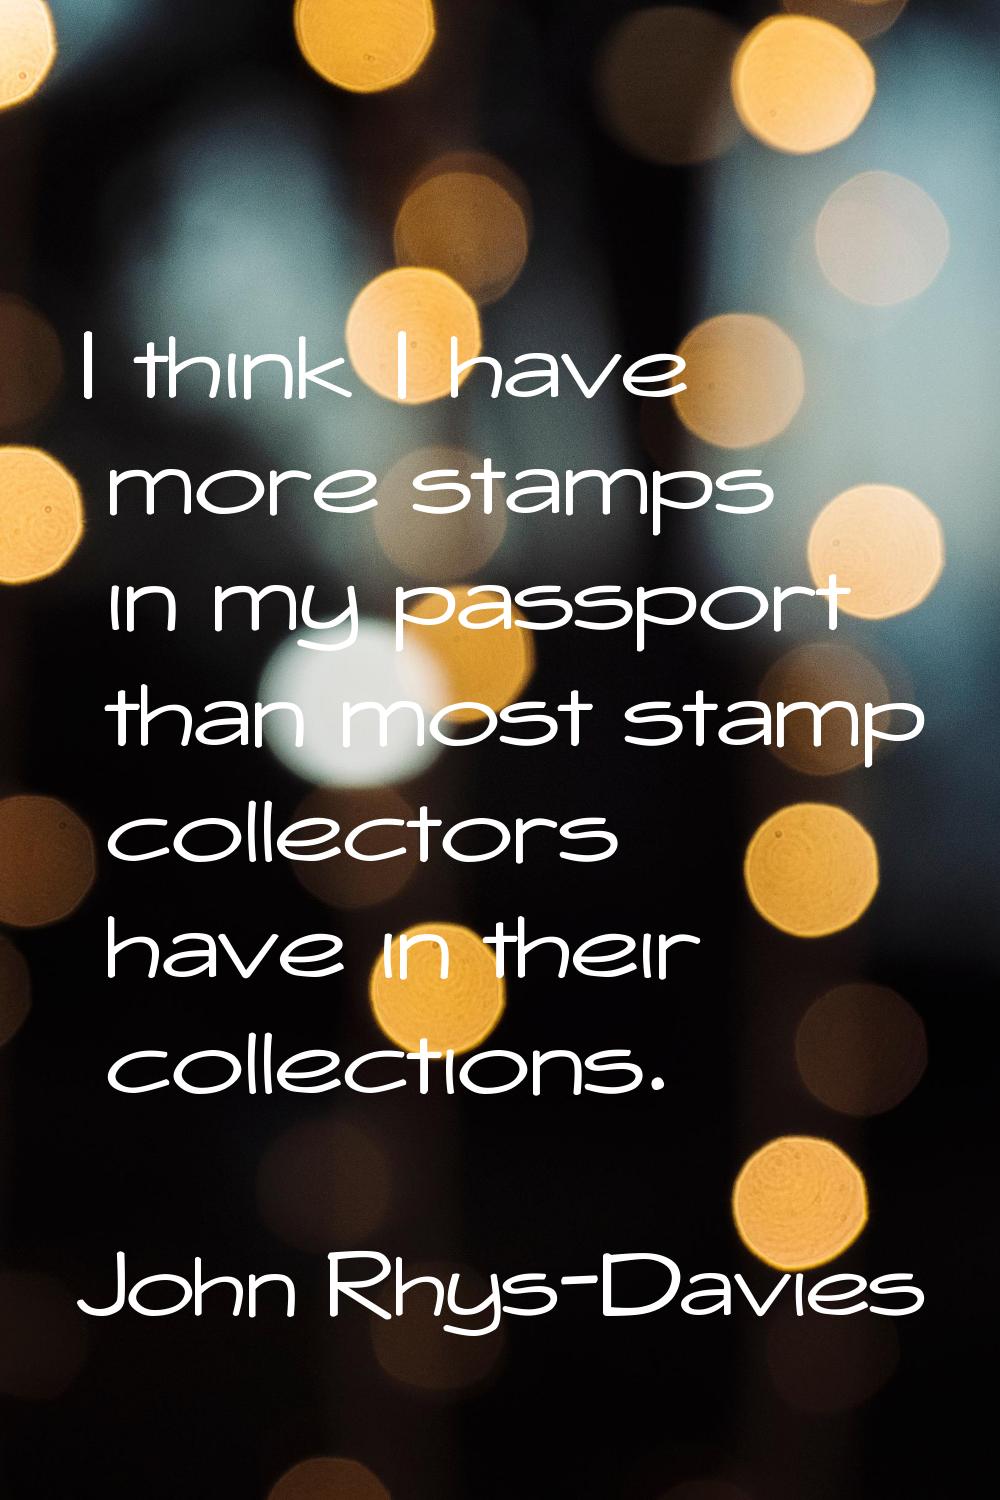 I think I have more stamps in my passport than most stamp collectors have in their collections.